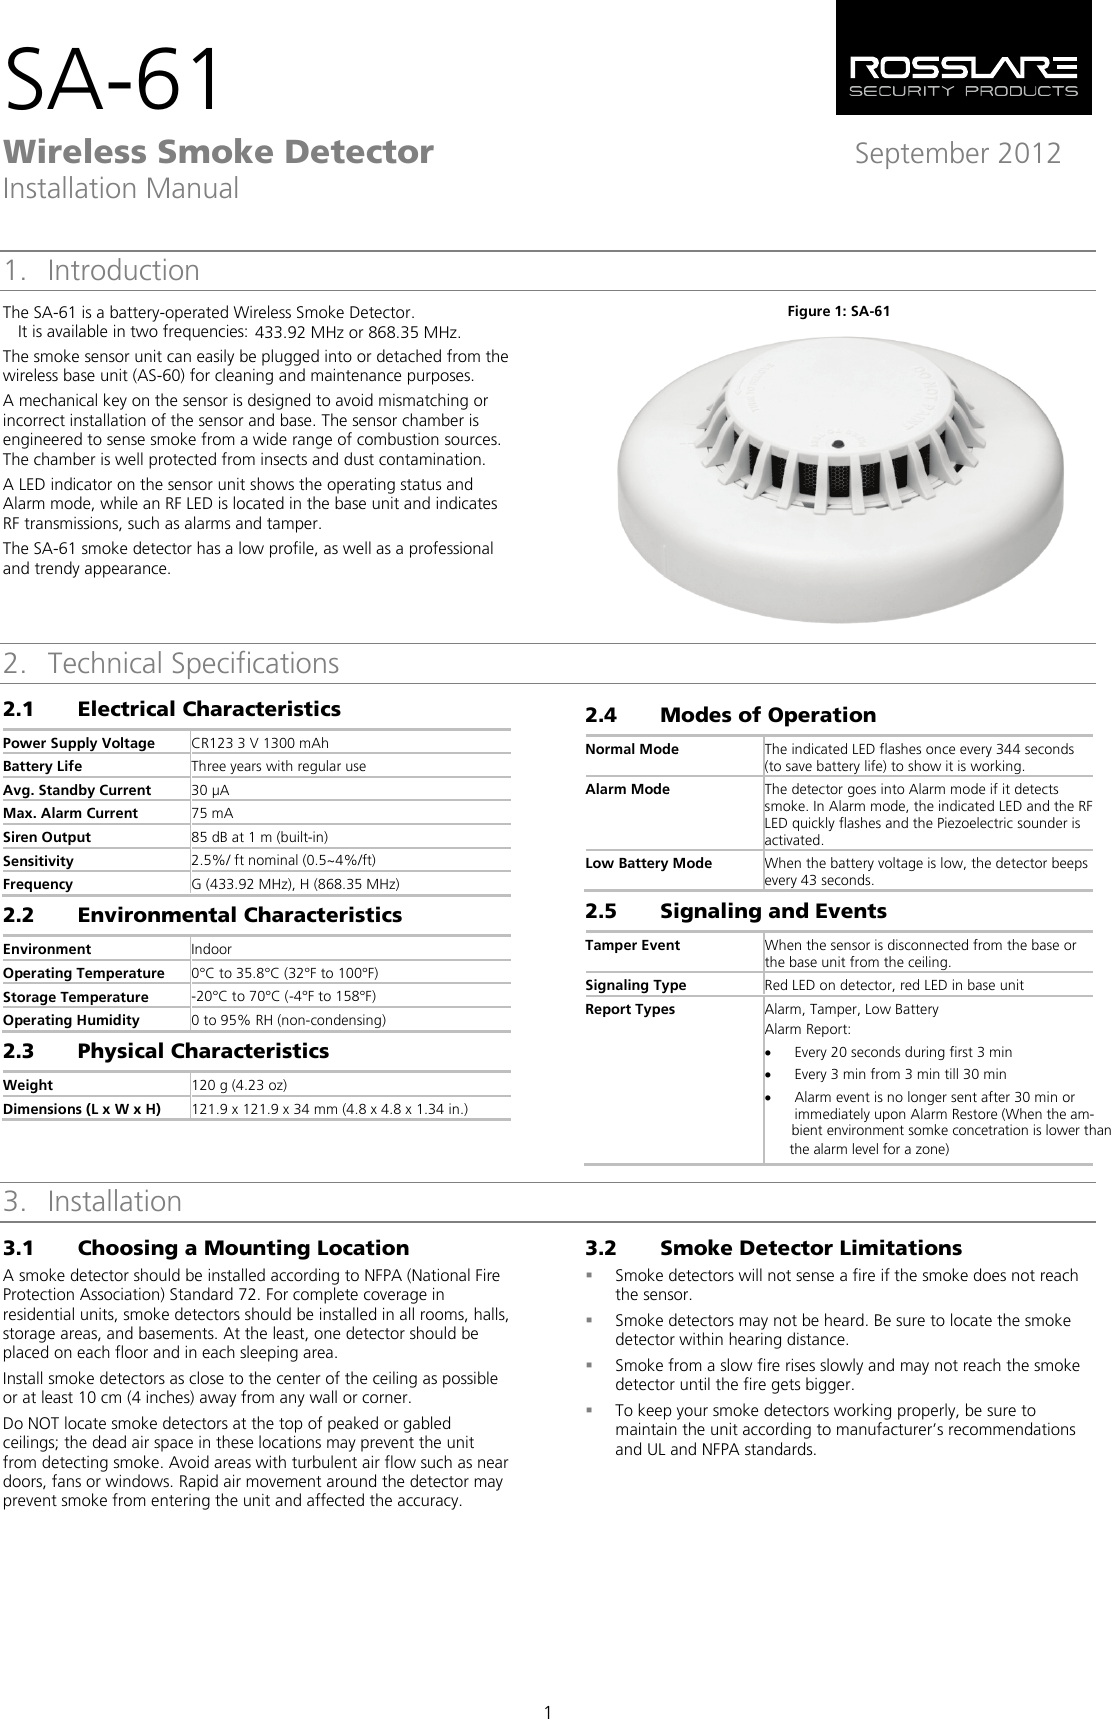 SA-61 Wireless Smoke Detector September 2012 Installation Manual  1 1. Introduction The SA-61 is a battery-operated Wireless Smoke Detector.433.92 MHz or 868.35 MHz. The smoke sensor unit can easily be plugged into or detached from the wireless base unit (AS-60) for cleaning and maintenance purposes. A mechanical key on the sensor is designed to avoid mismatching or incorrect installation of the sensor and base. The sensor chamber is engineered to sense smoke from a wide range of combustion sources. The chamber is well protected from insects and dust contamination. A LED indicator on the sensor unit shows the operating status and Alarm mode, while an RF LED is located in the base unit and indicates RF transmissions, such as alarms and tamper. The SA-61 smoke detector has a low profile, as well as a professional and trendy appearance. Figure 1: SA-61  2. Technical Specifications 2.1 Electrical Characteristics Power Supply Voltage CR123 3 V 1300 mAh Battery Life Three years with regular use Avg. Standby Current 30 µA Max. Alarm Current 75 mA Siren Output 85 dB at 1 m (built-in) Sensitivity 2.5%/ ft nominal (0.5~4%/ft) Frequency G (433.92 MHz), H (868.35 MHz) 2.2 Environmental Characteristics Environment Indoor Operating Temperature 0°C to 35.8°C (32°F to 100°F) Storage Temperature -20°C to 70°C (-4°F to 158°F) Operating Humidity 0 to 95% RH (non-condensing) 2.3 Physical Characteristics Weight 120 g (4.23 oz) Dimensions (L x W x H) 121.9 x 121.9 x 34 mm (4.8 x 4.8 x 1.34 in.) 2.4 Modes of Operation Normal Mode The indicated LED flashes once every 344 seconds (to save battery life) to show it is working. Alarm Mode The detector goes into Alarm mode if it detects smoke. In Alarm mode, the indicated LED and the RF LED quickly flashes and the Piezoelectric sounder is activated. Low Battery Mode When the battery voltage is low, the detector beeps every 43 seconds. 2.5 Signaling and Events Tamper Event When the sensor is disconnected from the base or the base unit from the ceiling. Signaling Type Red LED on detector, red LED in base unit Report Types  Alarm, Tamper, Low Battery Alarm Report:  • Every 20 seconds during first 3 min • Every 3 min from 3 min till 30 min • Alarm event is no longer sent after 30 min or immediately upon Alarm Restore (When the am-    3. Installation 3.1 Choosing a Mounting Location A smoke detector should be installed according to NFPA (National Fire Protection Association) Standard 72. For complete coverage in residential units, smoke detectors should be installed in all rooms, halls, storage areas, and basements. At the least, one detector should be placed on each floor and in each sleeping area. Install smoke detectors as close to the center of the ceiling as possible or at least 10 cm (4 inches) away from any wall or corner. Do NOT locate smoke detectors at the top of peaked or gabled ceilings; the dead air space in these locations may prevent the unit from detecting smoke. Avoid areas with turbulent air flow such as near doors, fans or windows. Rapid air movement around the detector may prevent smoke from entering the unit and affected the accuracy. 3.2 Smoke Detector Limitations  Smoke detectors will not sense a fire if the smoke does not reach the sensor.  Smoke detectors may not be heard. Be sure to locate the smoke detector within hearing distance.   Smoke from a slow fire rises slowly and may not reach the smoke detector until the fire gets bigger.  To keep your smoke detectors working properly, be sure to maintain the unit according to manufacturer’s recommendations and UL and NFPA standards.  It is available in two frequencies:  bient environment somke concetration is lower thanthe alarm level for a zone)